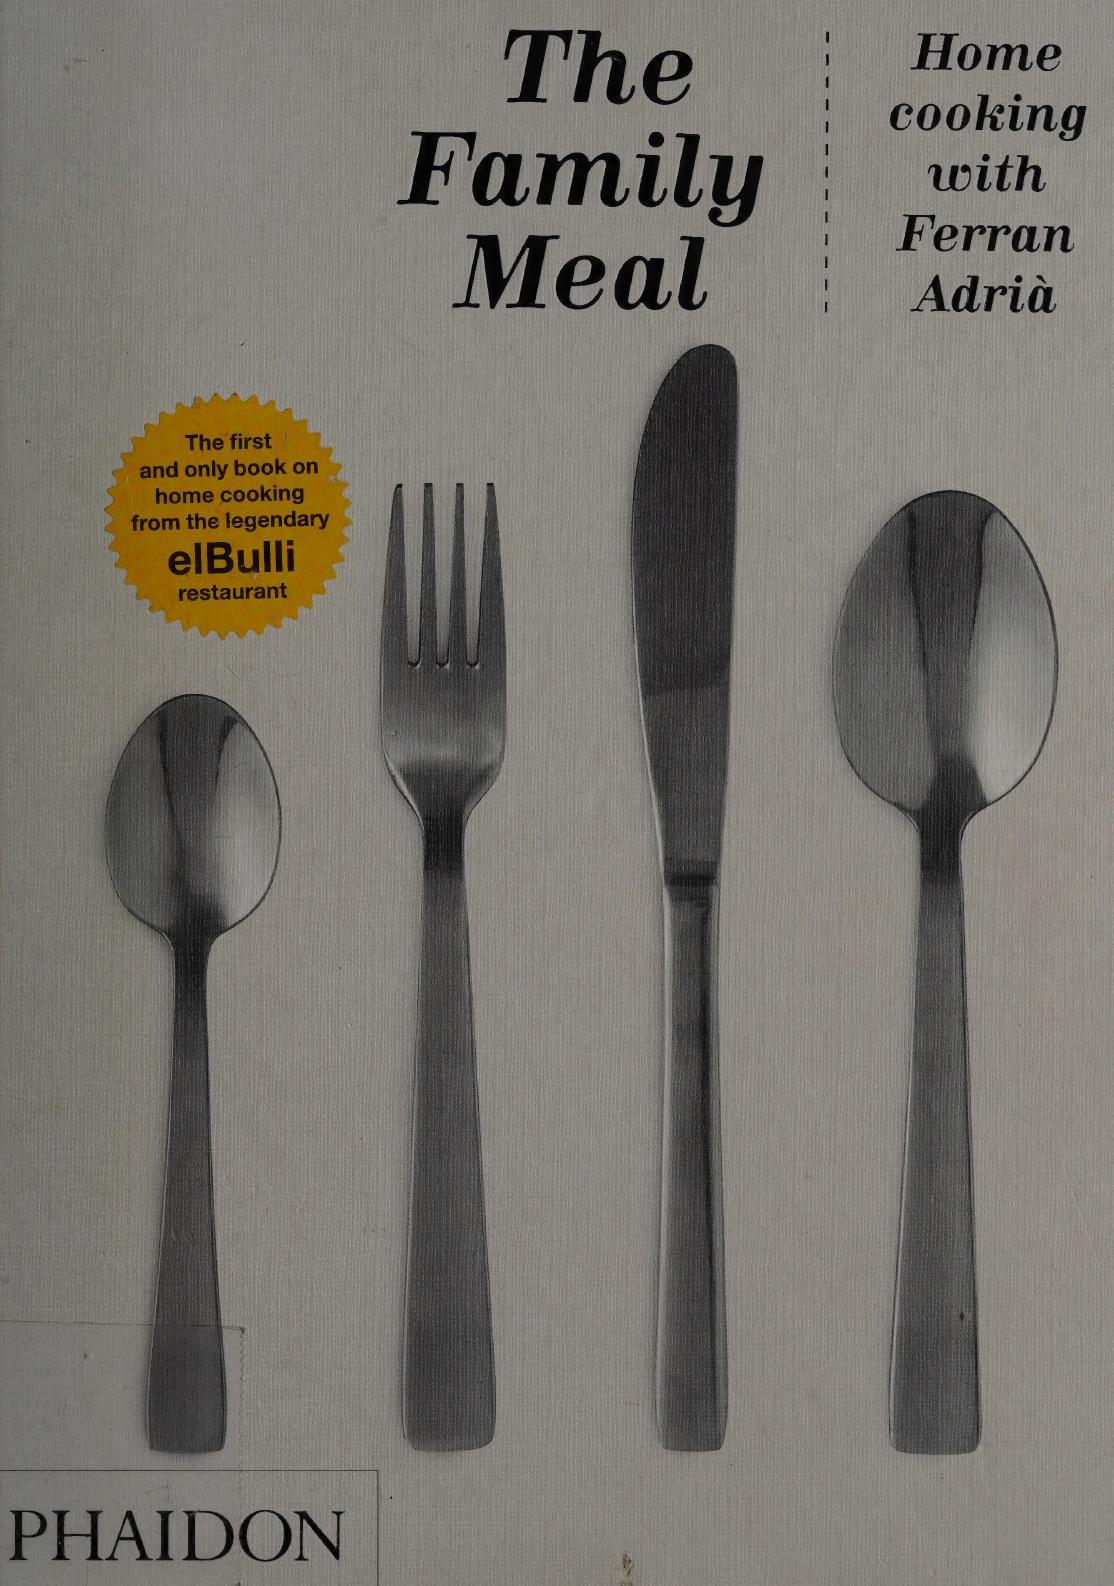 The Family Meal: Home Cooking with Ferran Adria by Ferran Adria